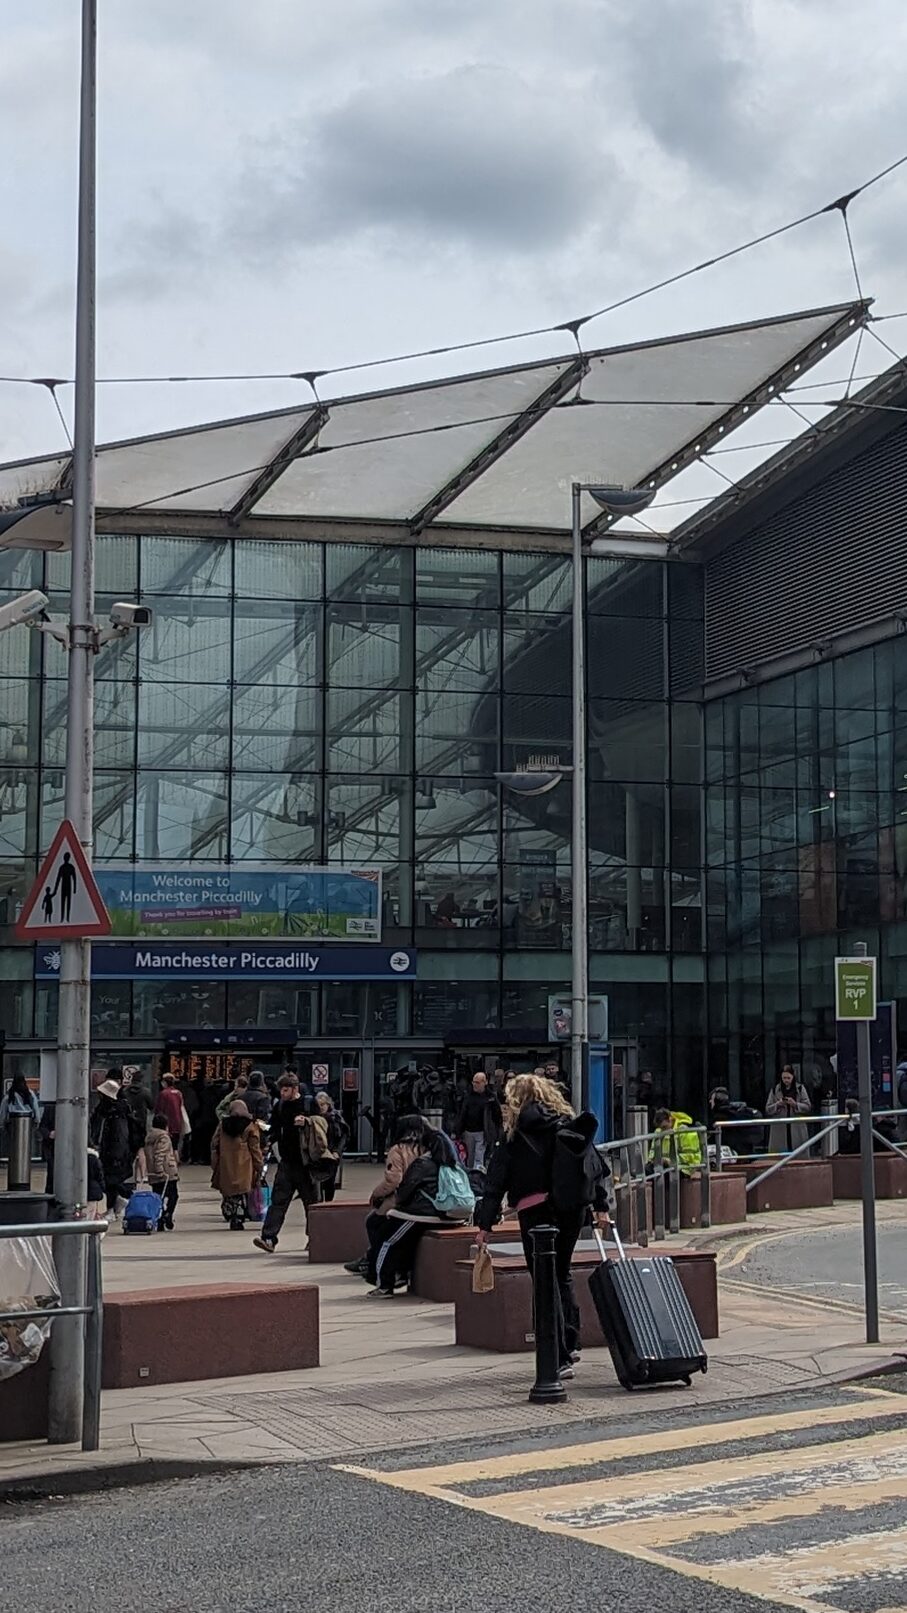 An image of Manchester Piccadilly station as the faster line to Liverpool is announced